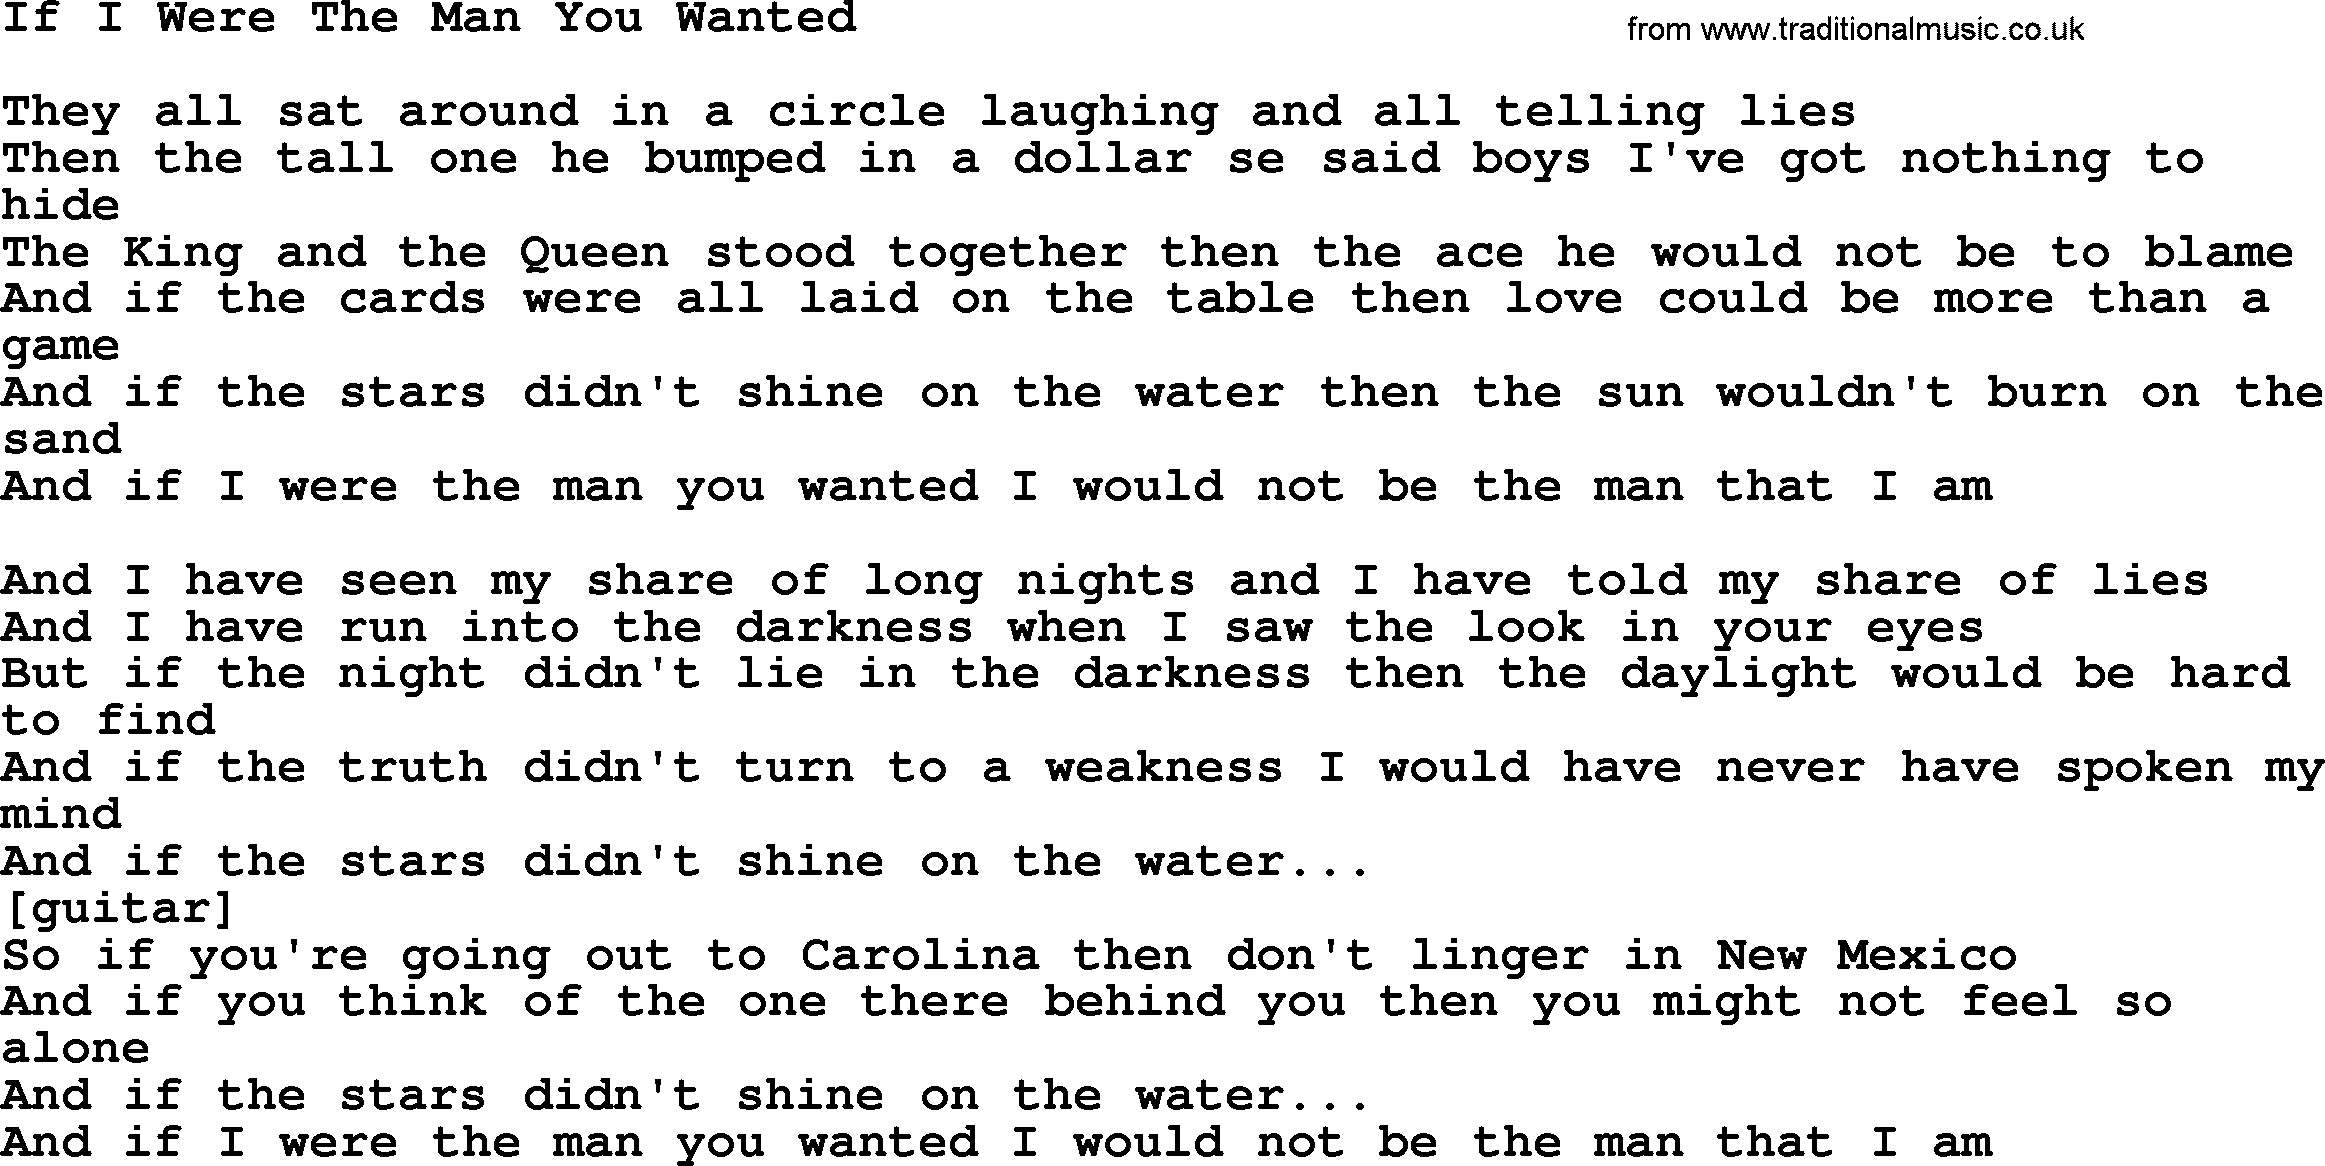 Willie Nelson song: If I Were The Man You Wanted lyrics